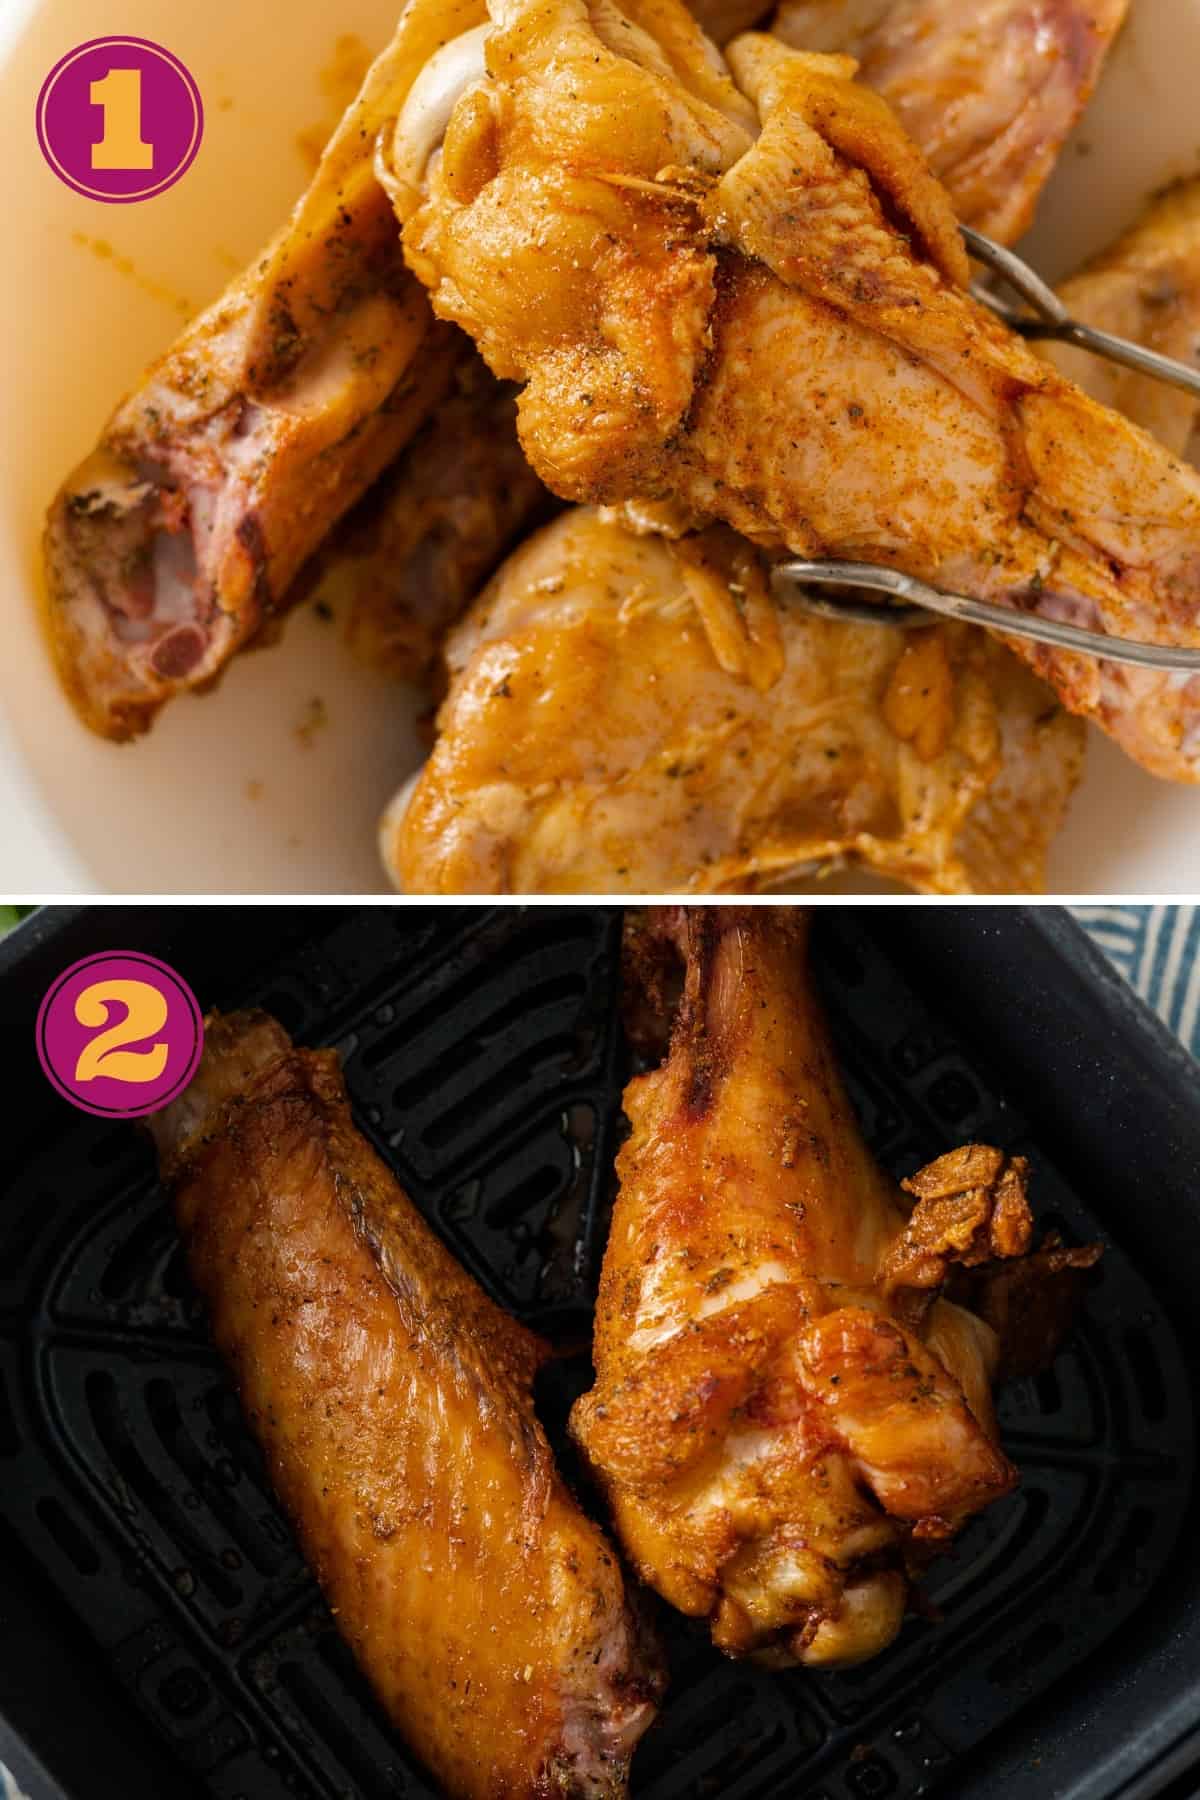 Two numbered pictures: first, a turkey wing being held by tongs, and second, turkey wings in an air fryer